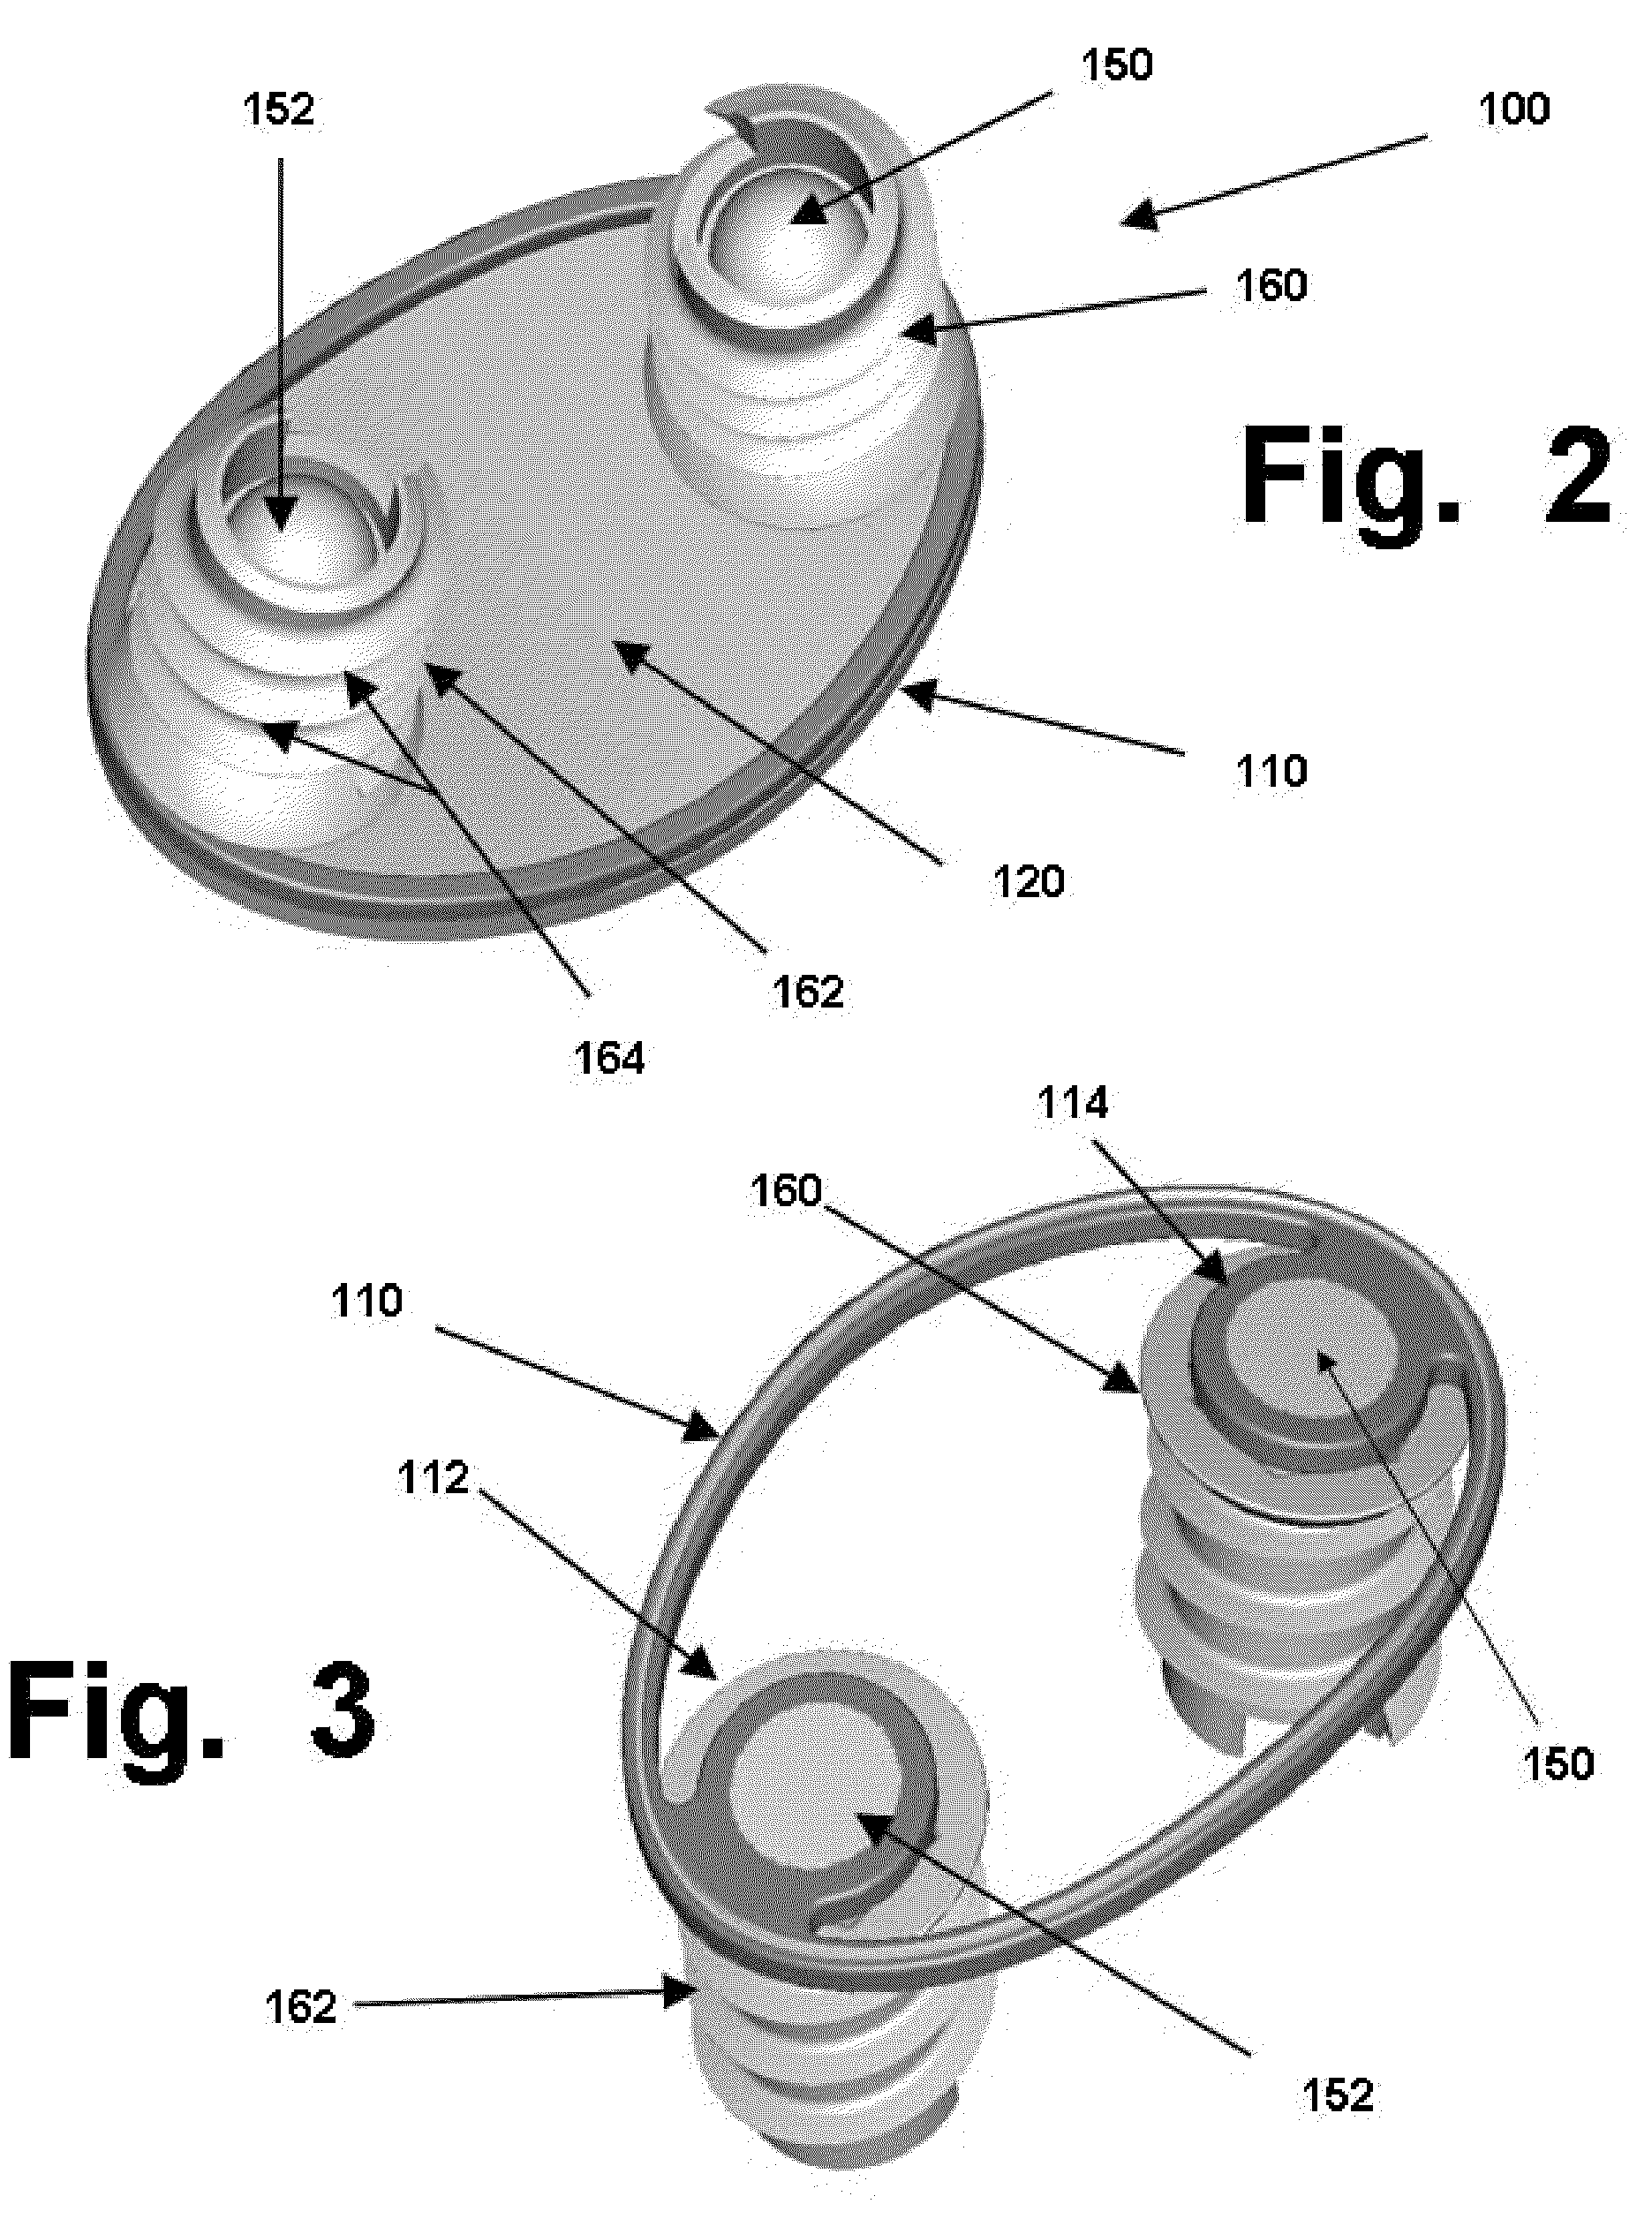 Anchoring systems and interfaces for flexible surgical implants for replacing cartilage